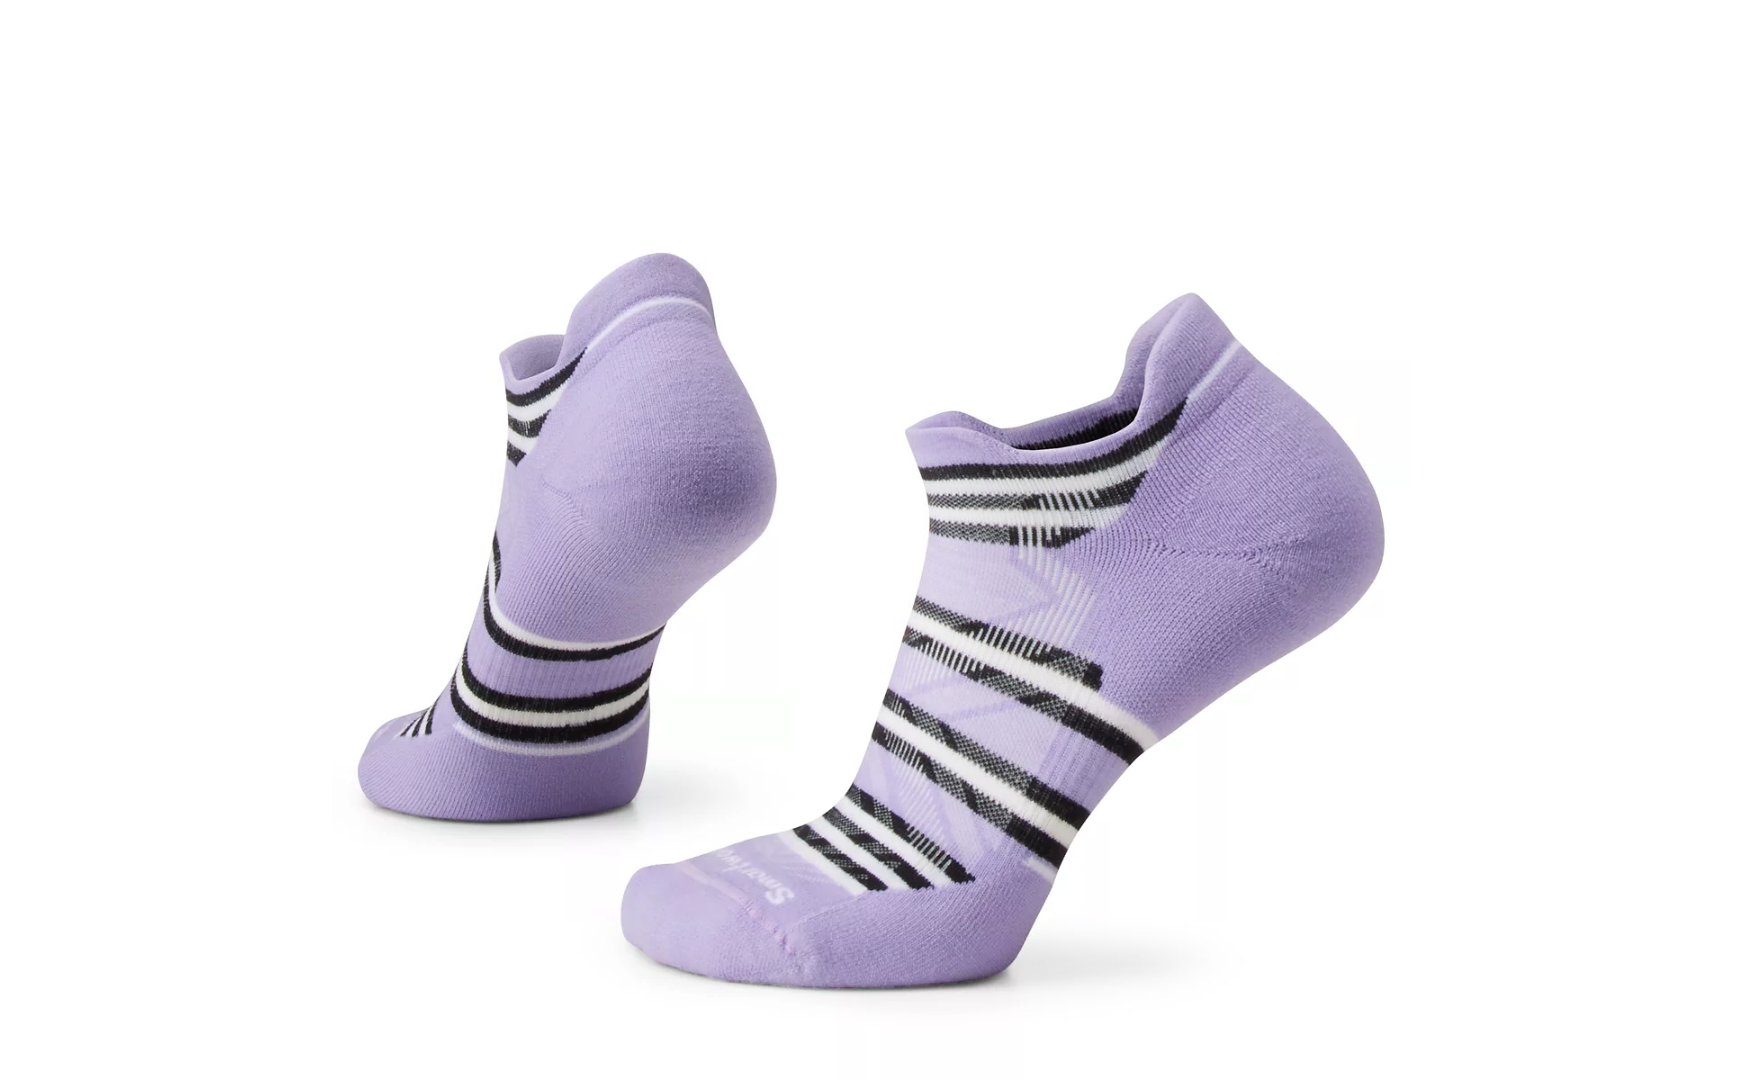 SMARTWOOL WOMEN'S RUN TARGETED CUSHION LOW ANKLE SOCK - CLEARANCE L46 ULTRA VIOLET